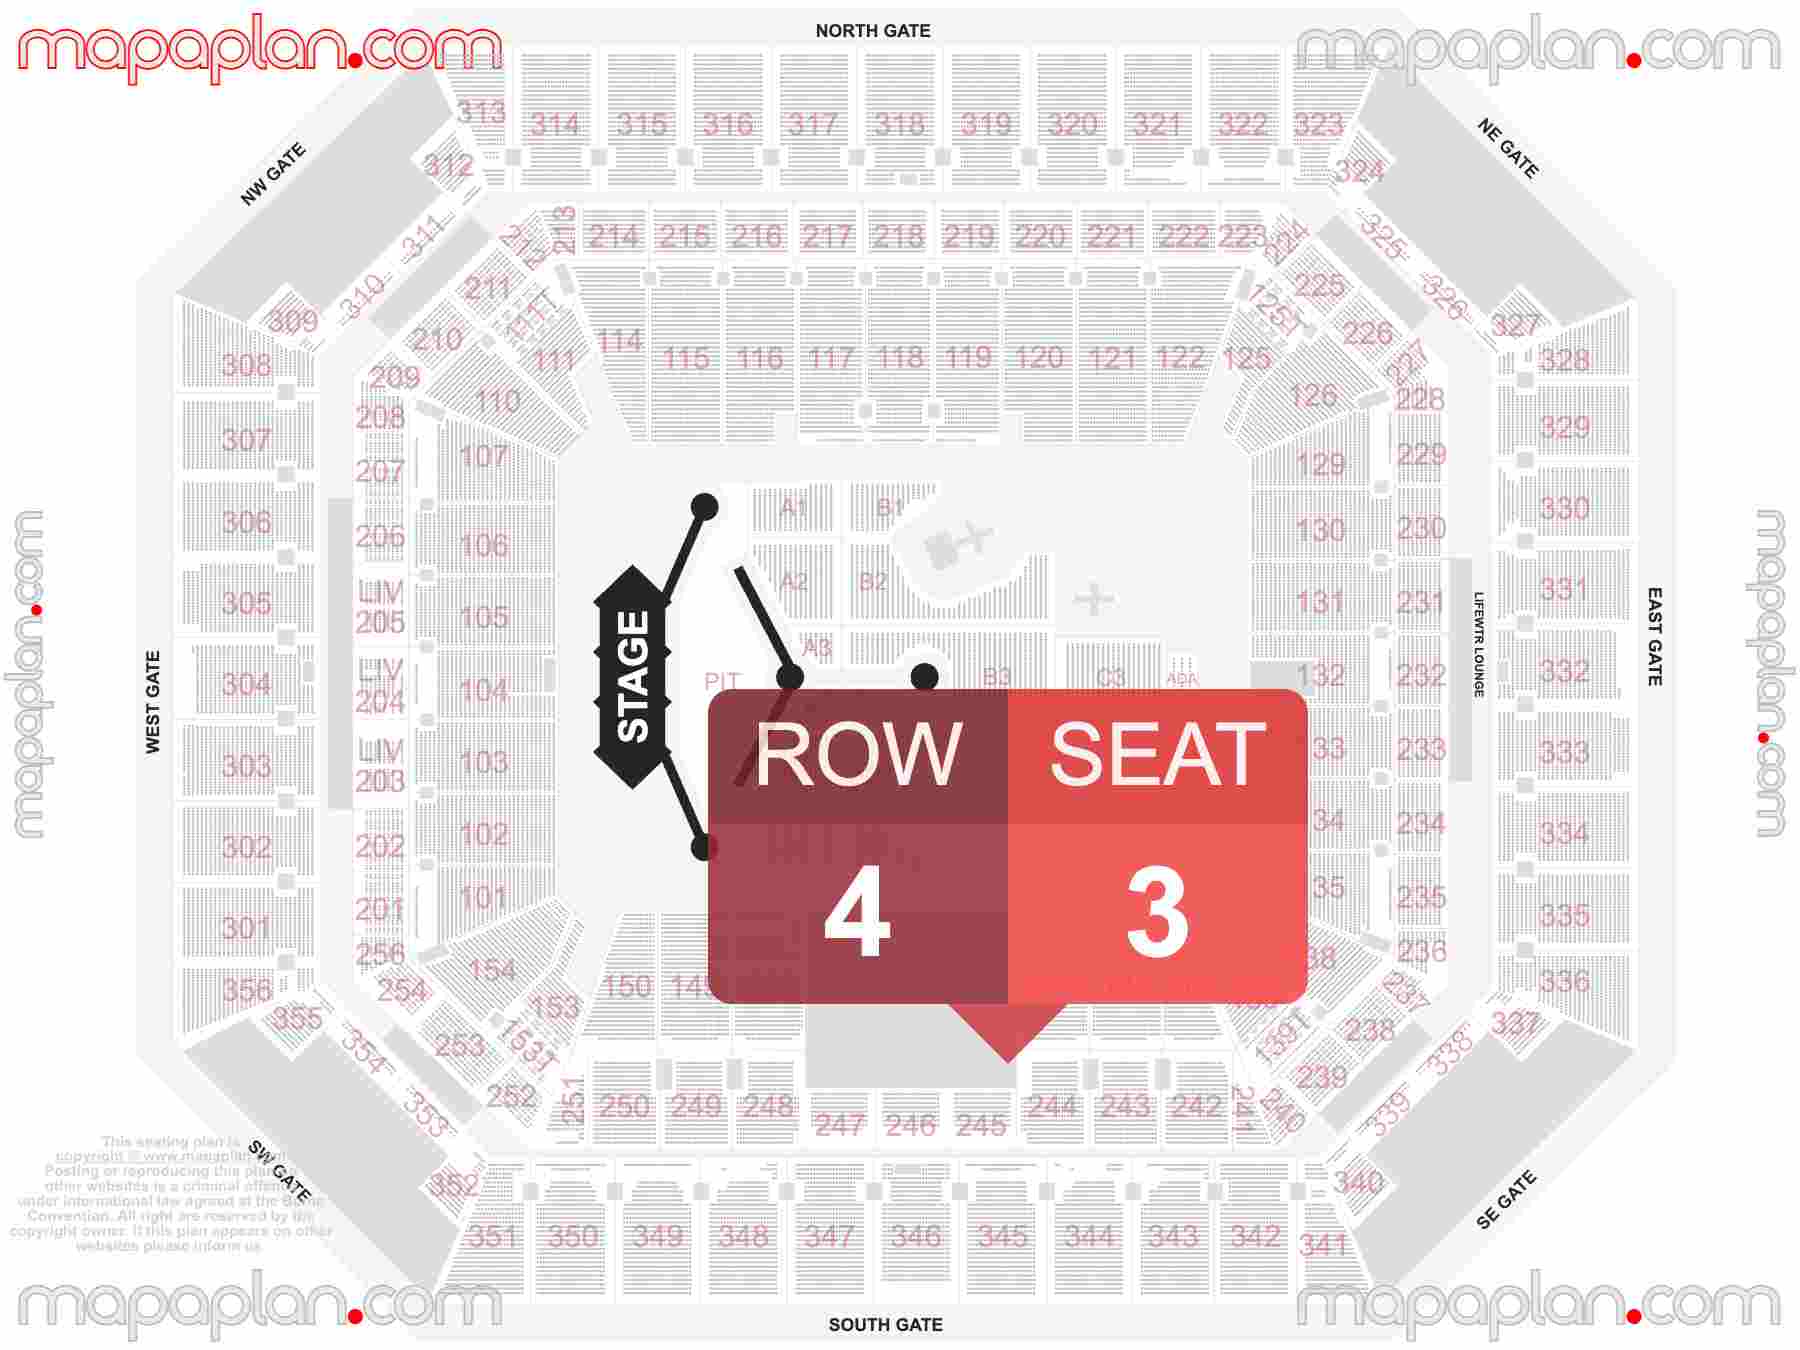 Miami Hard Rock Stadium seating chart Concert detailed seat numbers and row numbering chart with interactive map plan layout